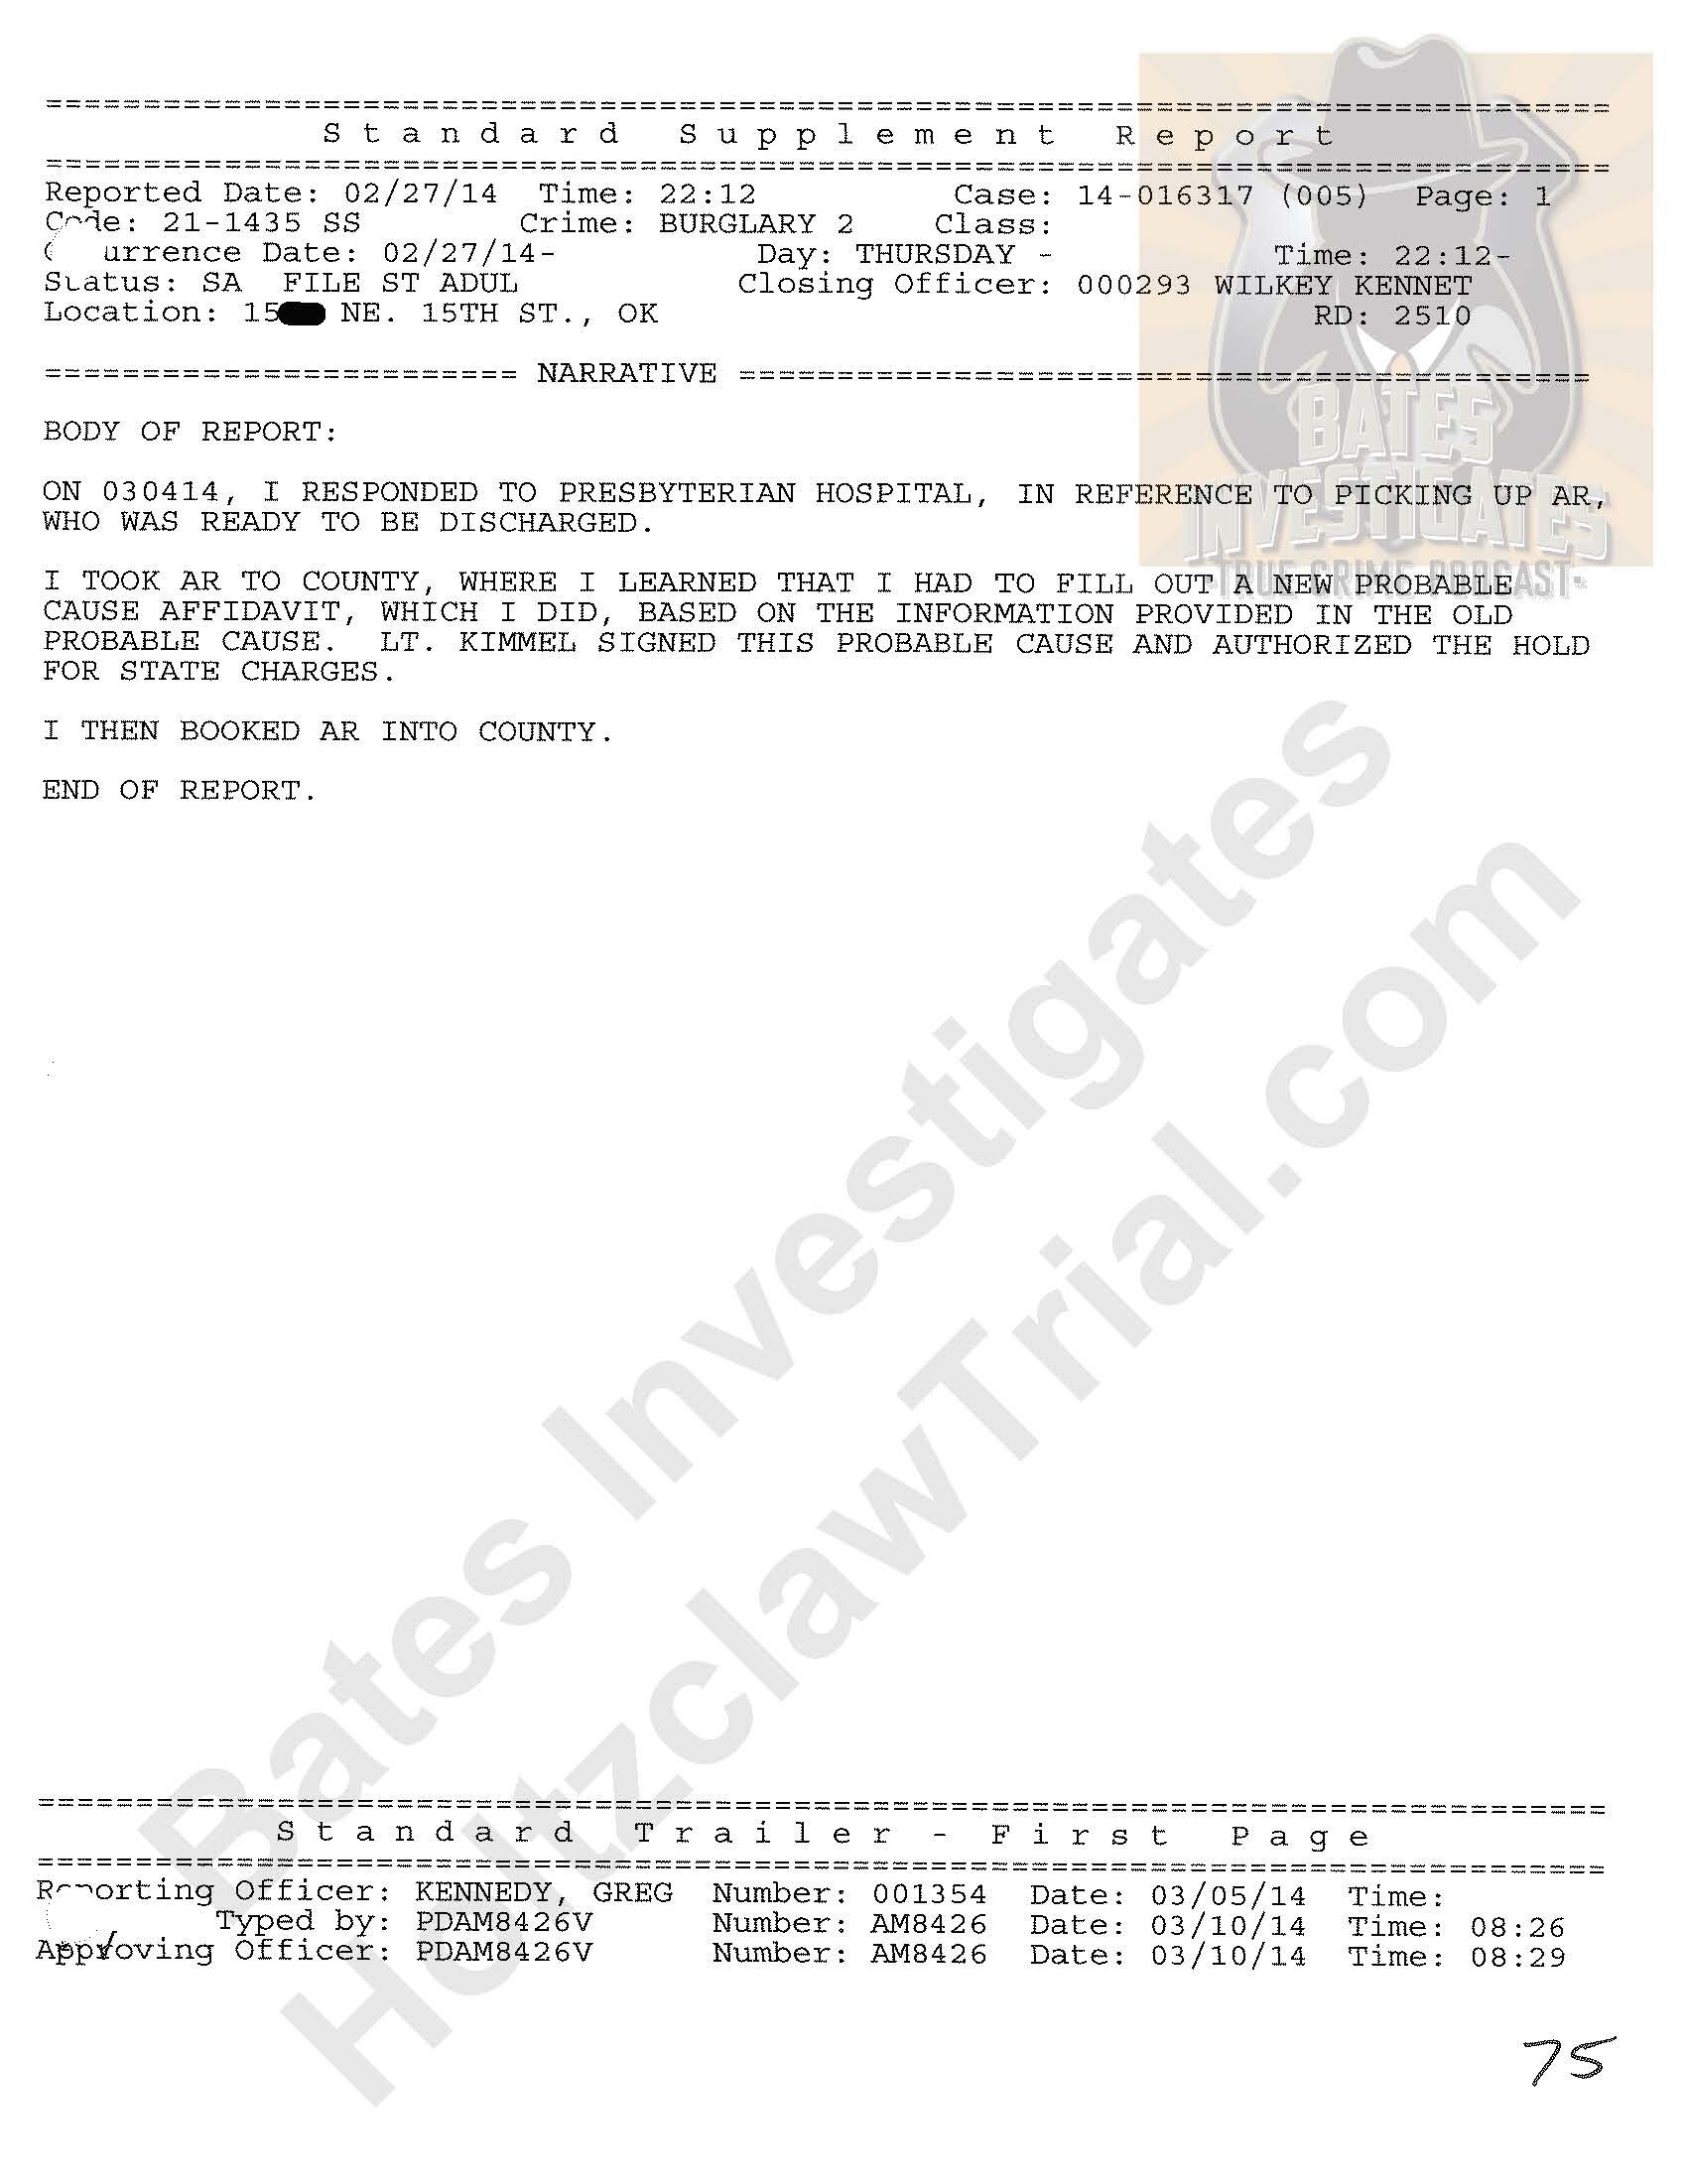 Tabitha Barnes Police Report to Post_Page_37.jpg